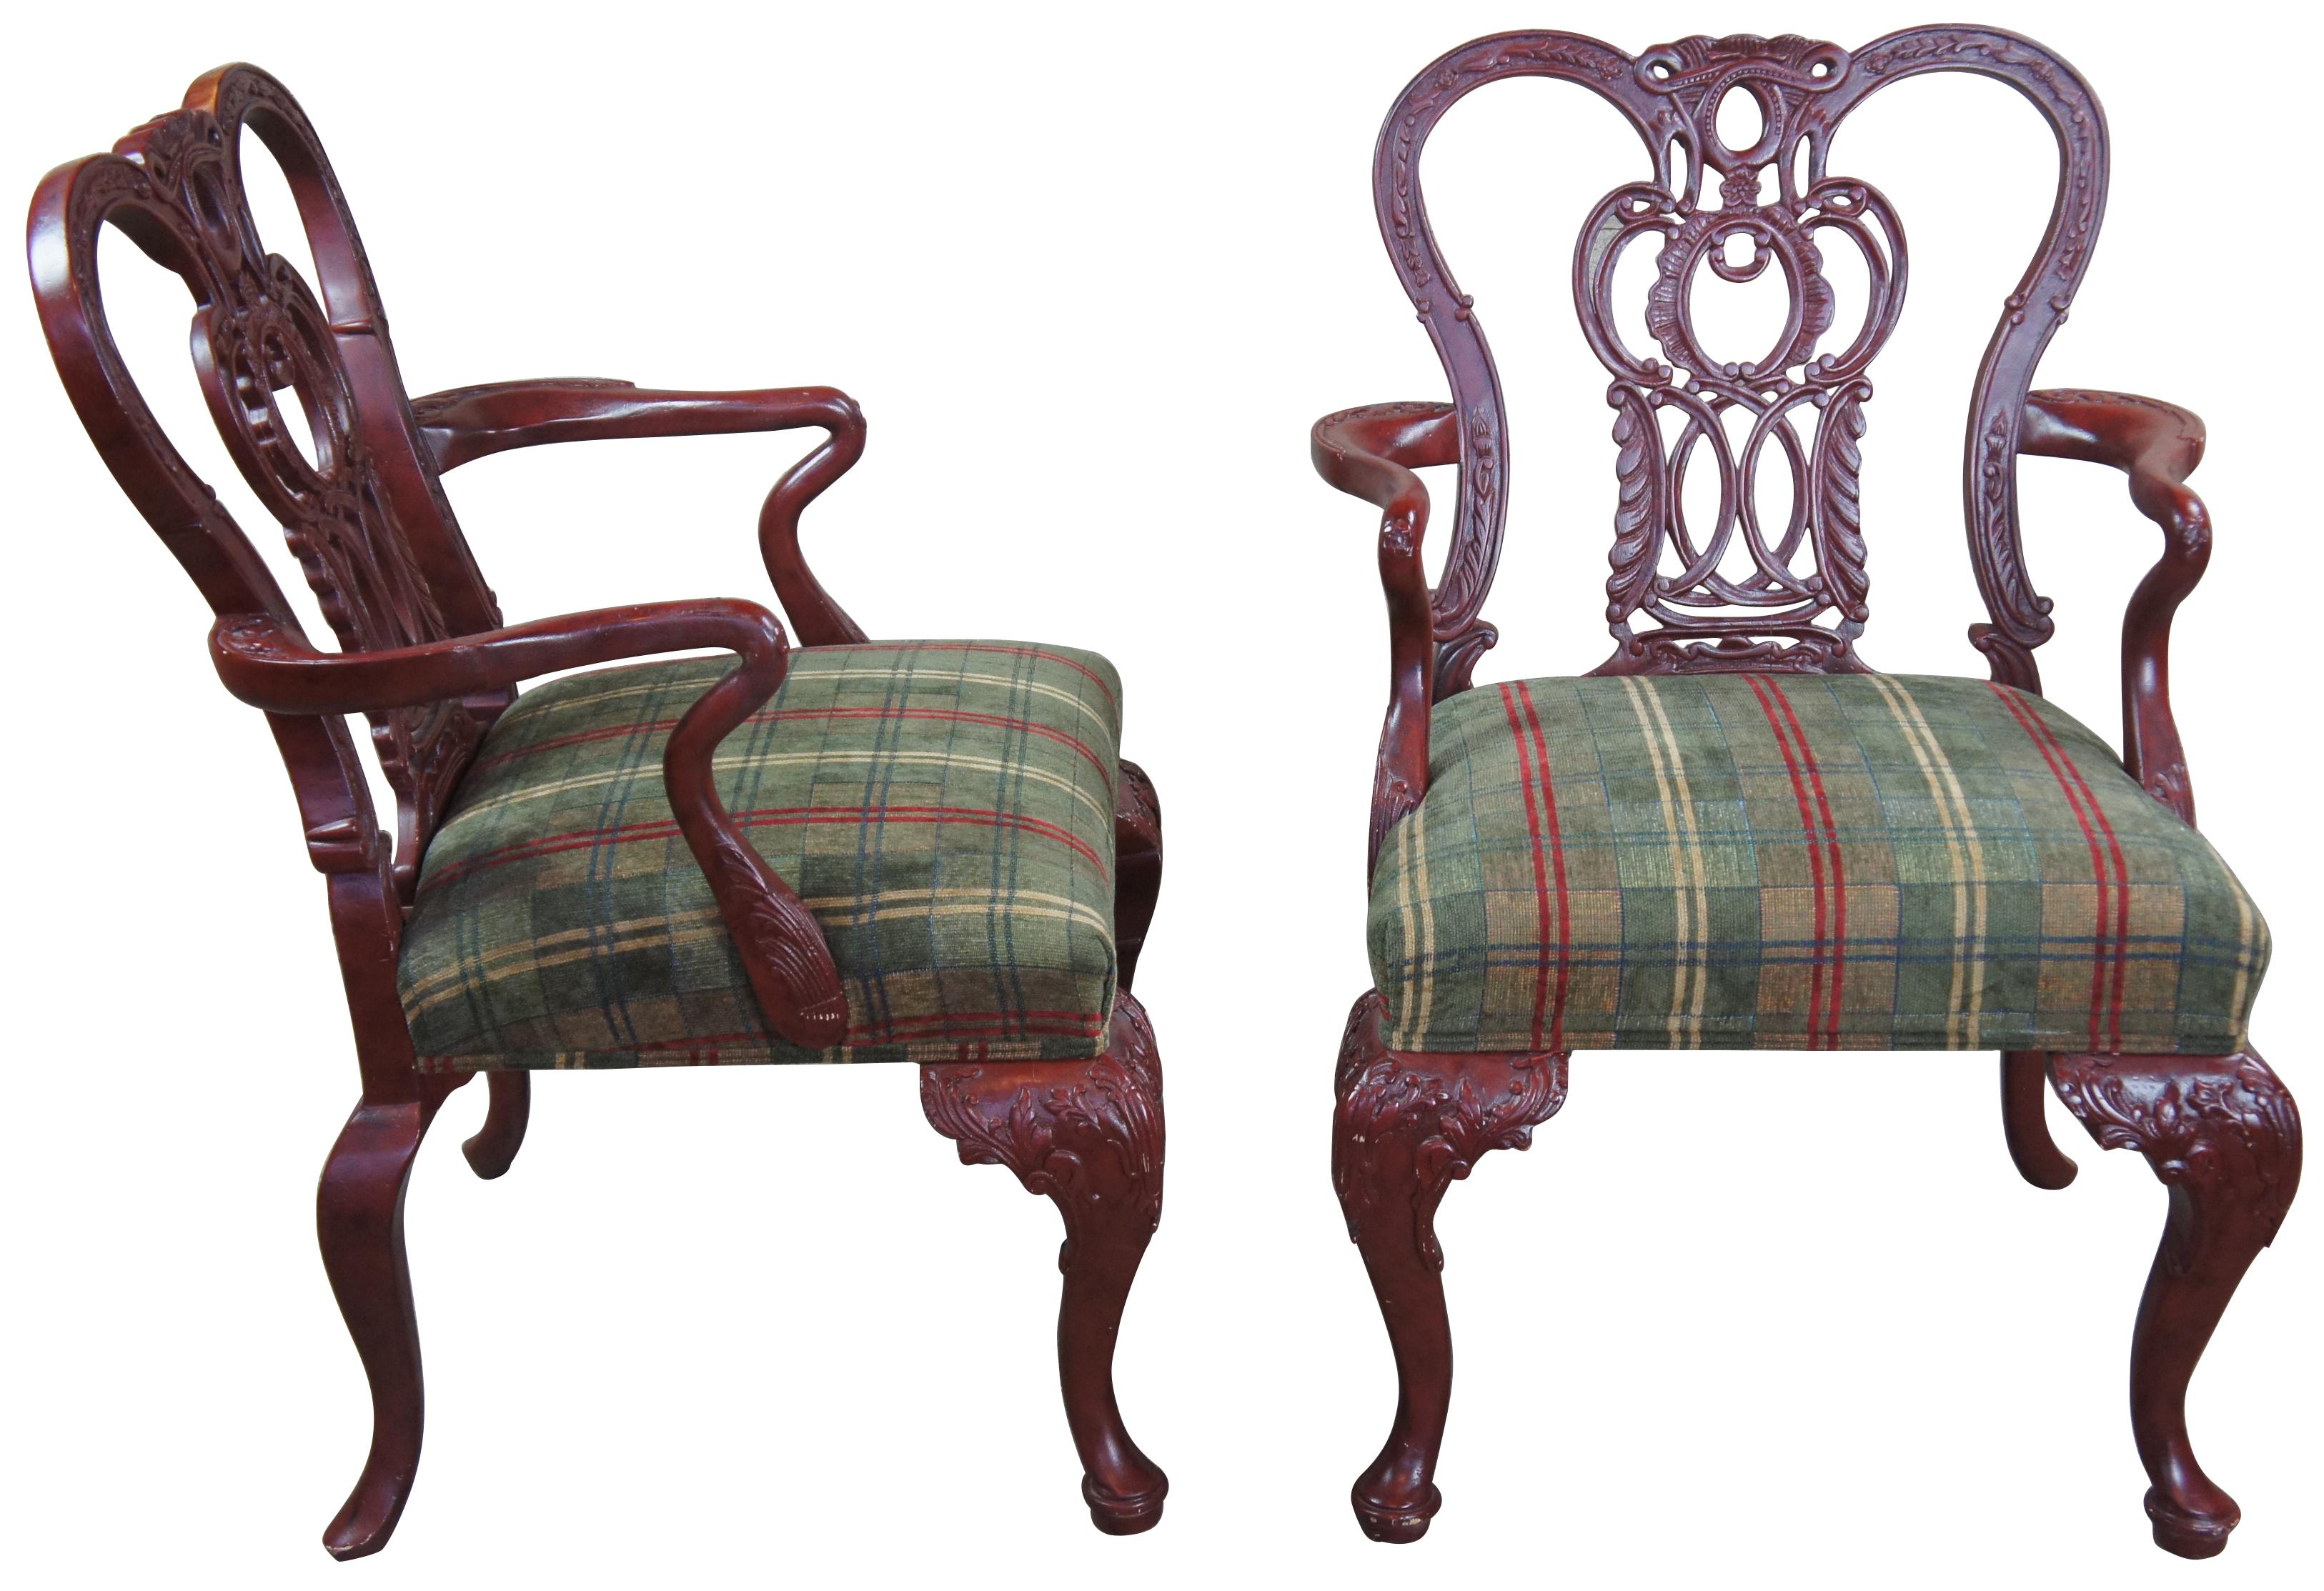 2 vintage Century Furniture Chippendale gooseneck red mahogany arm accent chairs

Pair of Chippendale style armchairs by Century Furniture of Hickory North Carolina. Features ornate Chippendale styling with gooseneck arms, detailed carving and